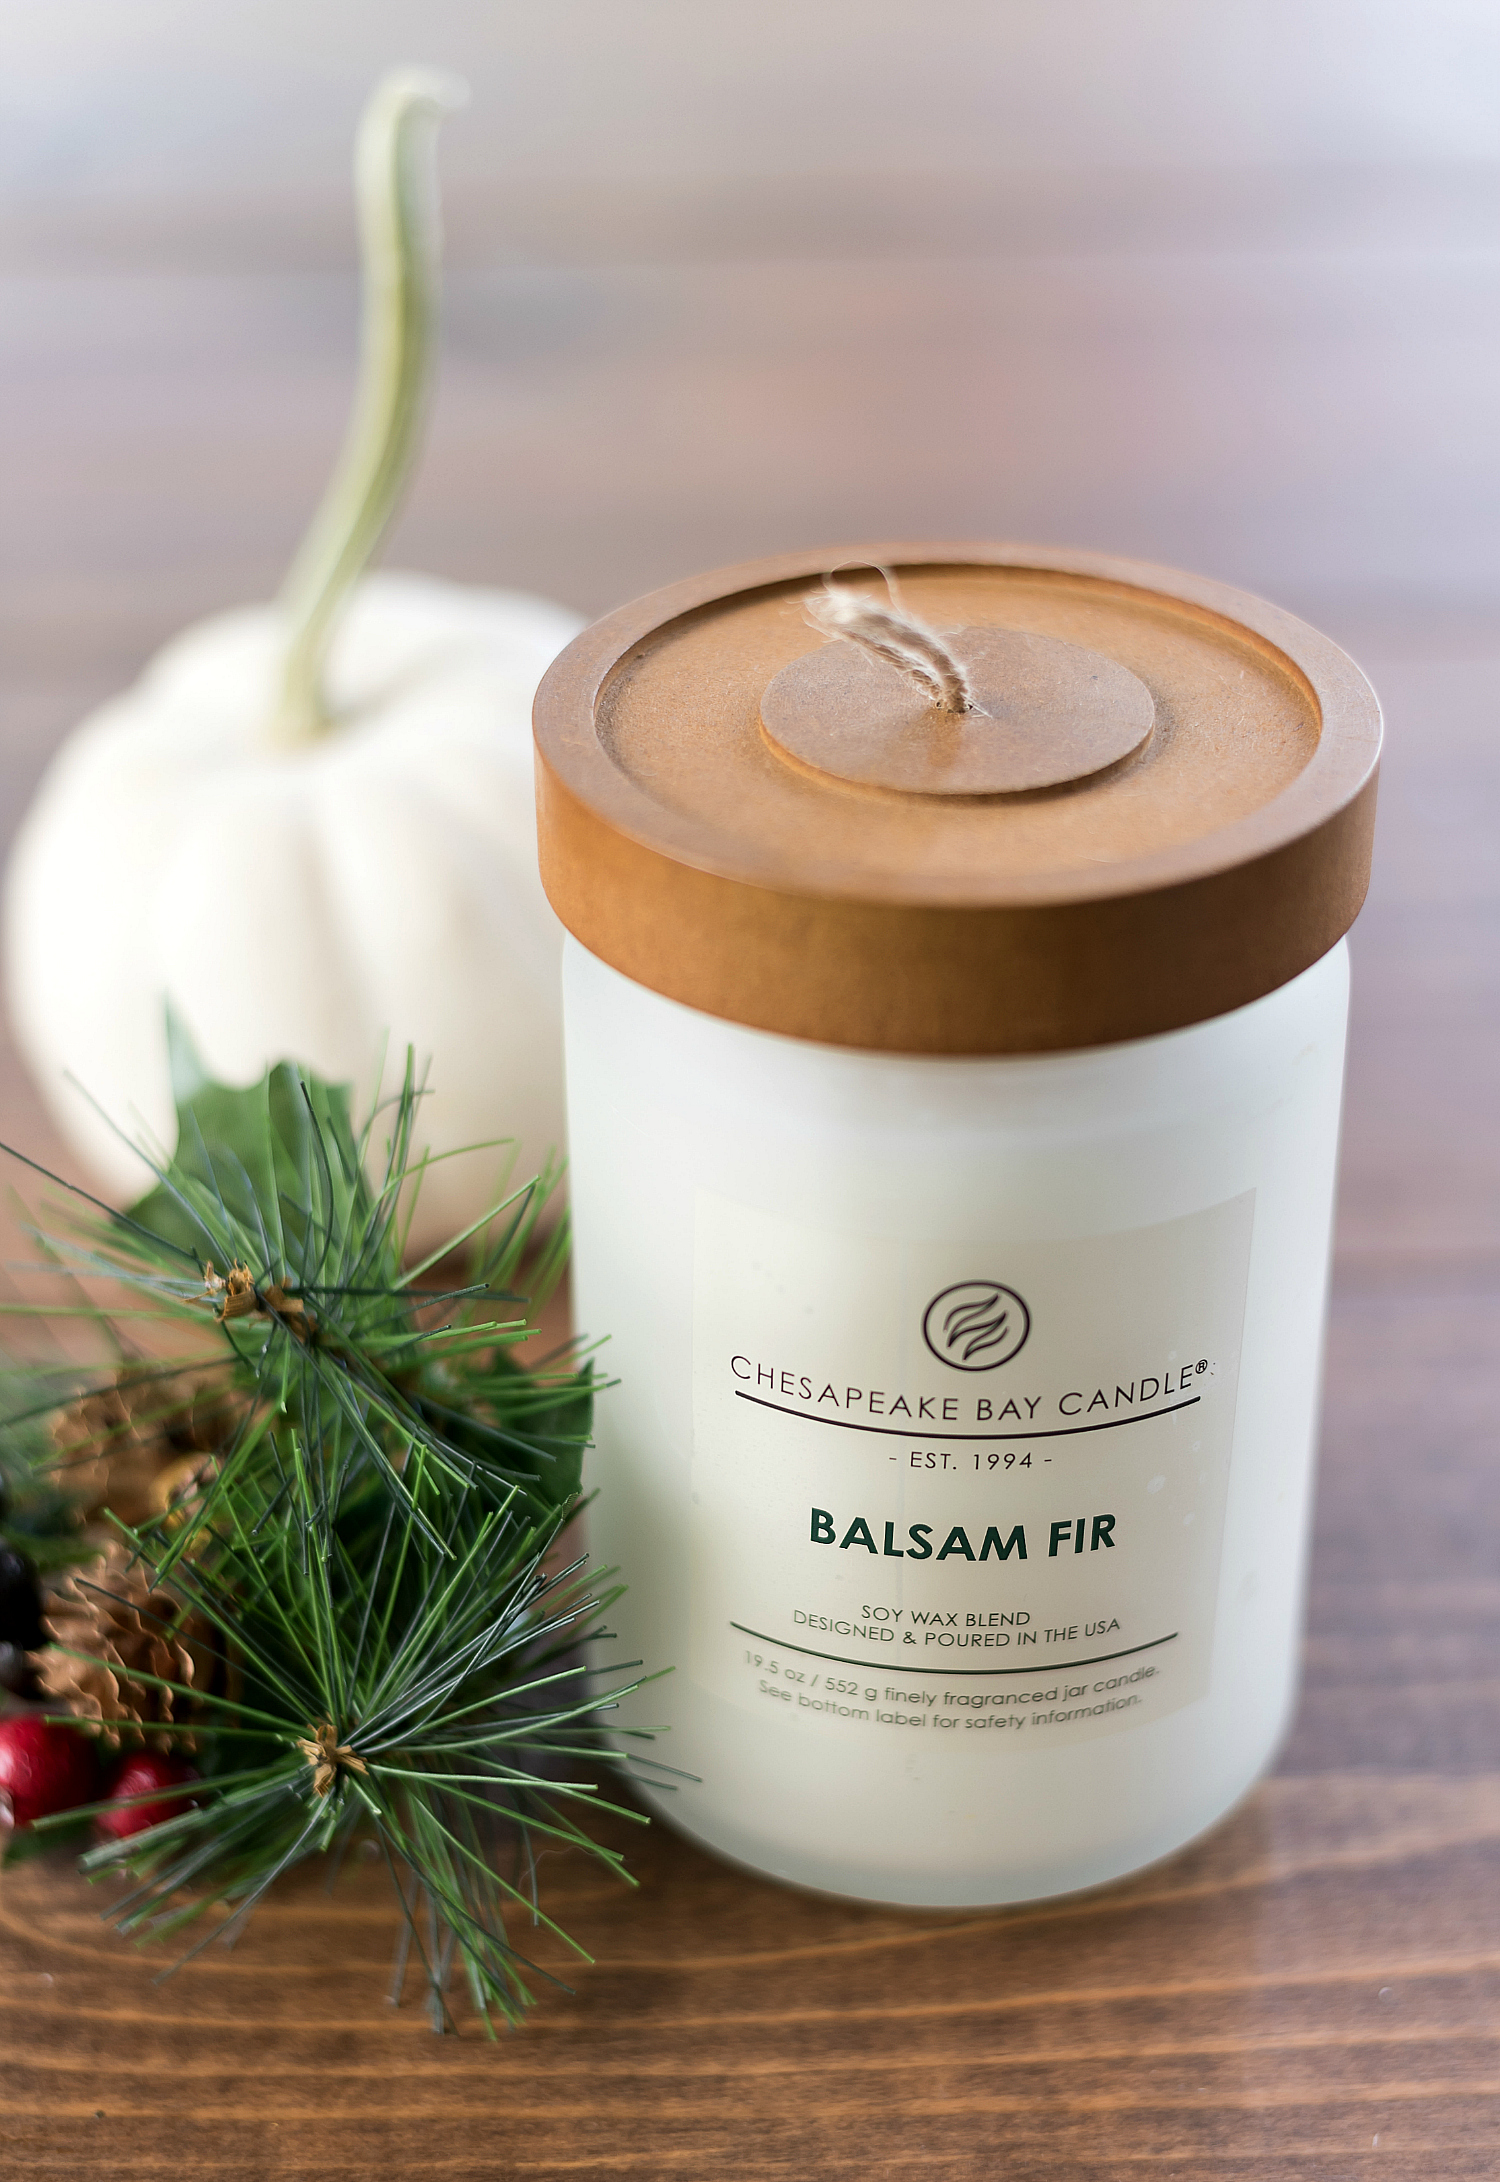 Balsam Fir Candle from Chesapeake Bay Candle Heritage Collection Fall 2017